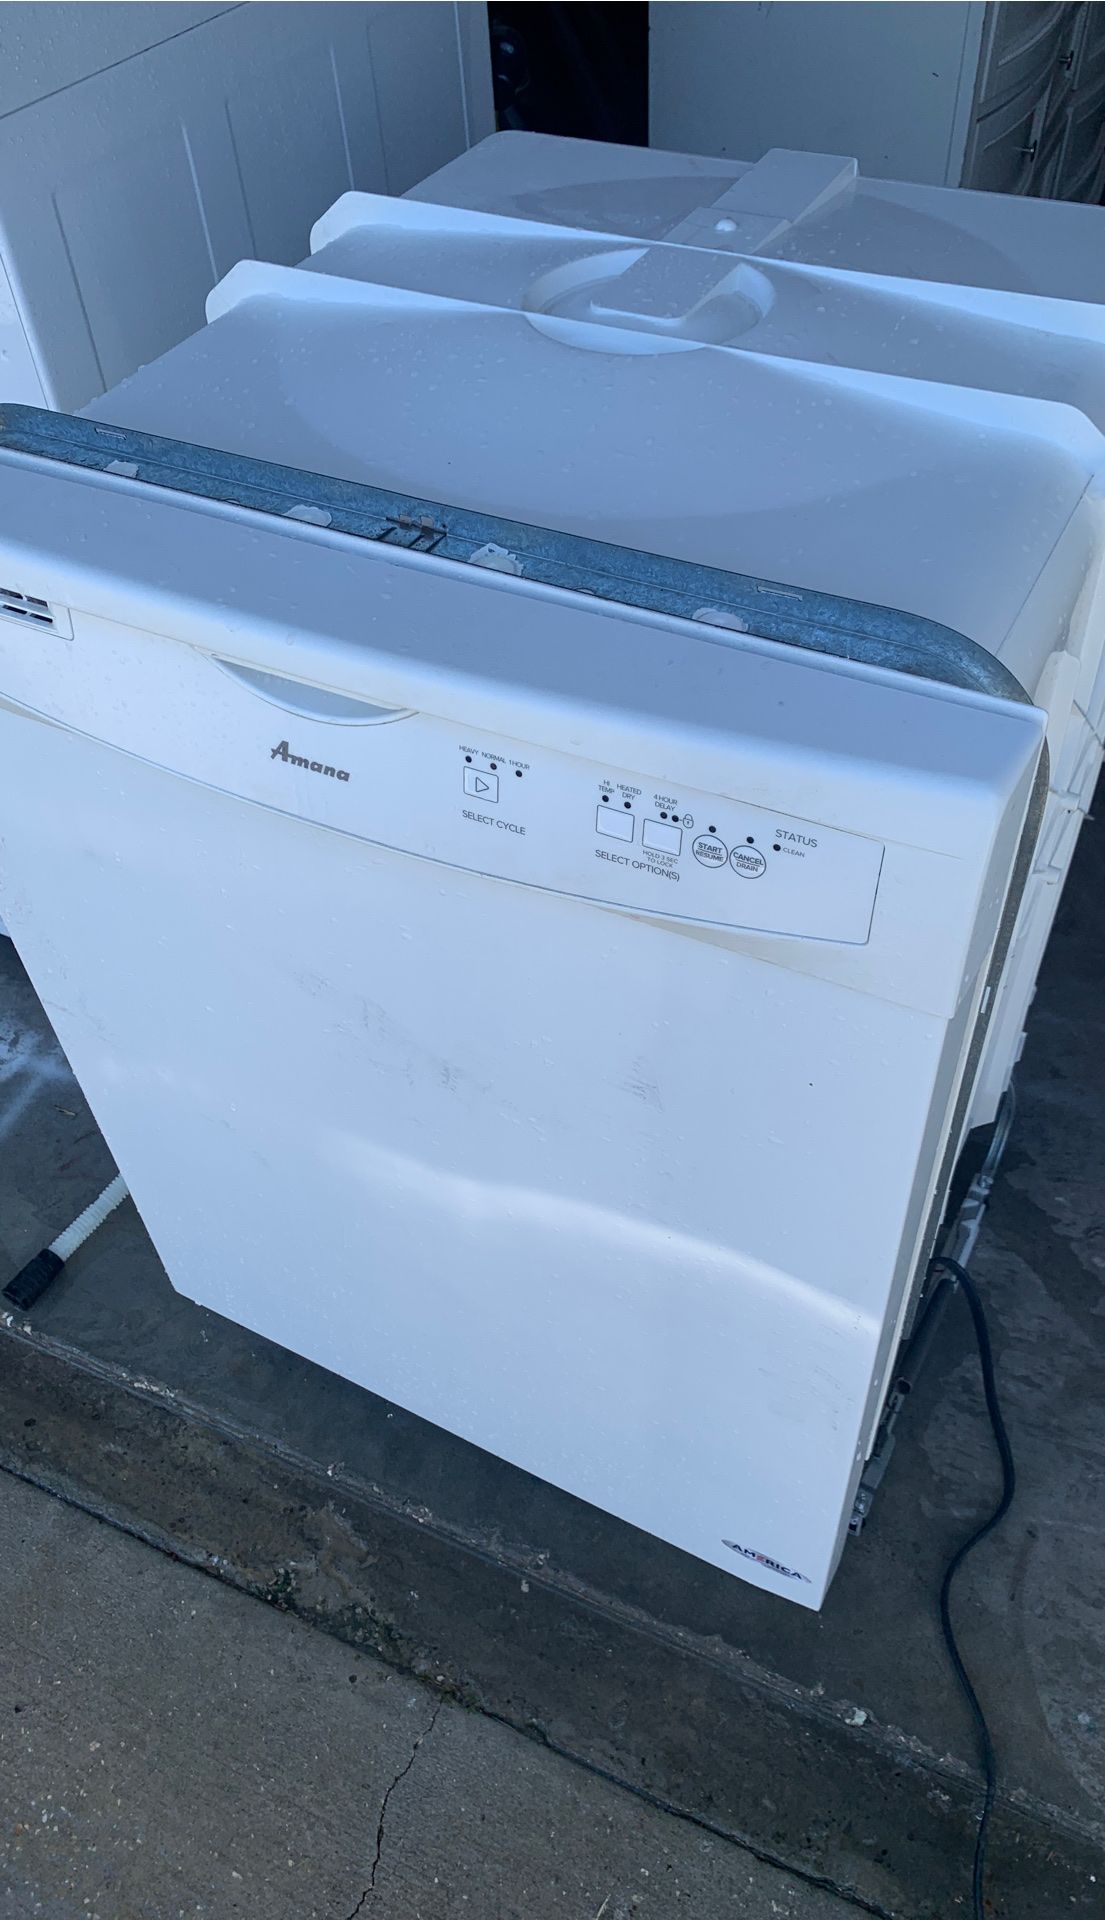 Amana dishwasher washer comes on but may need work